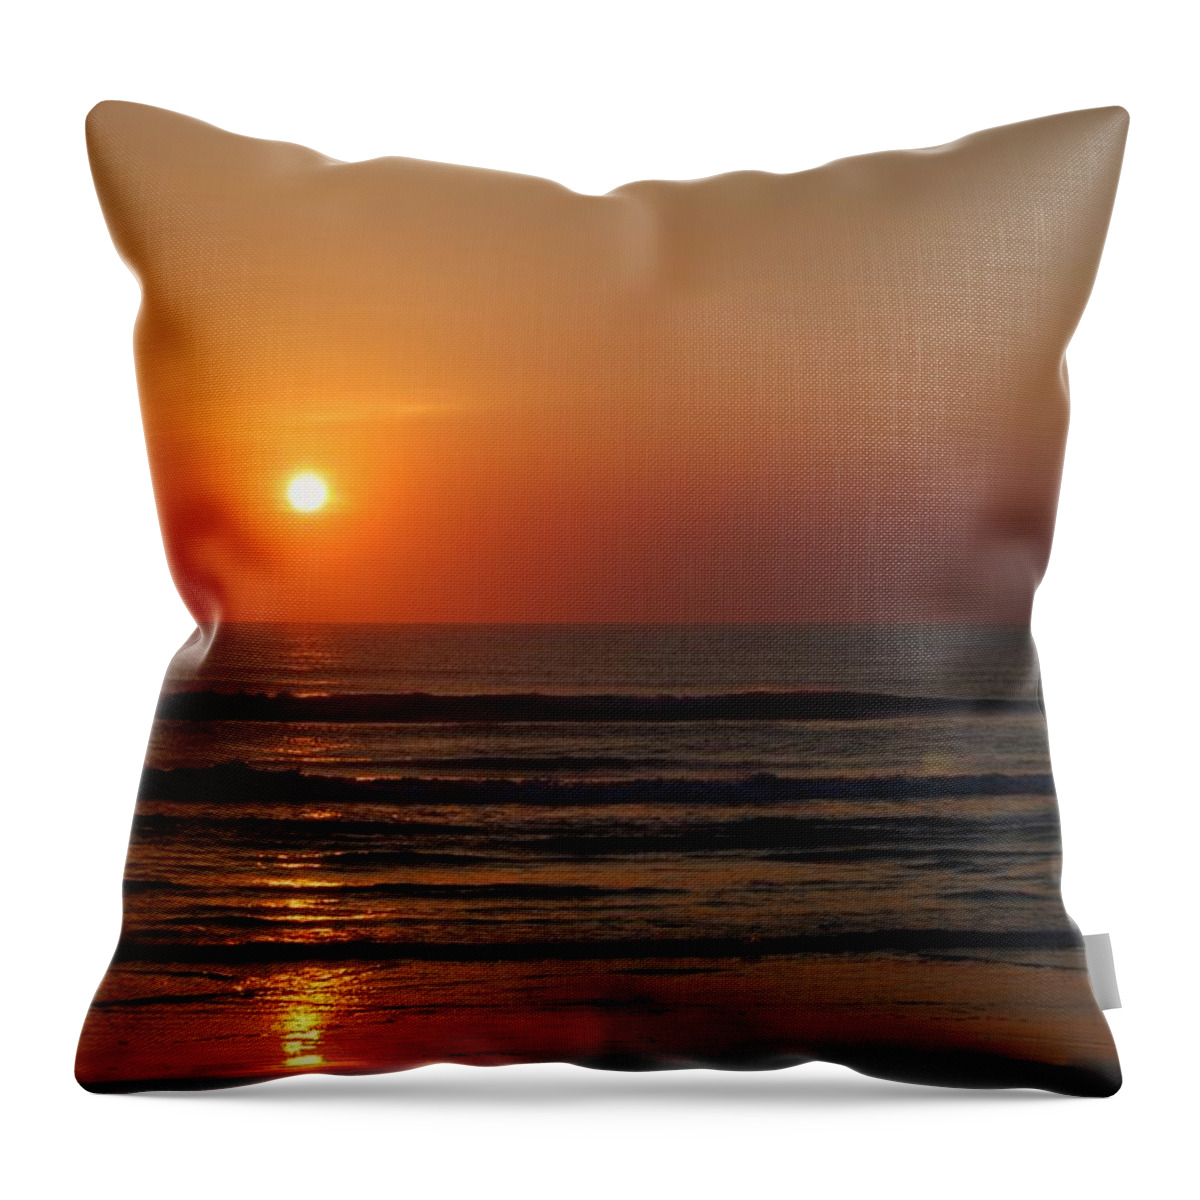 Seascape Throw Pillow featuring the photograph Morning Reflection by Christopher James